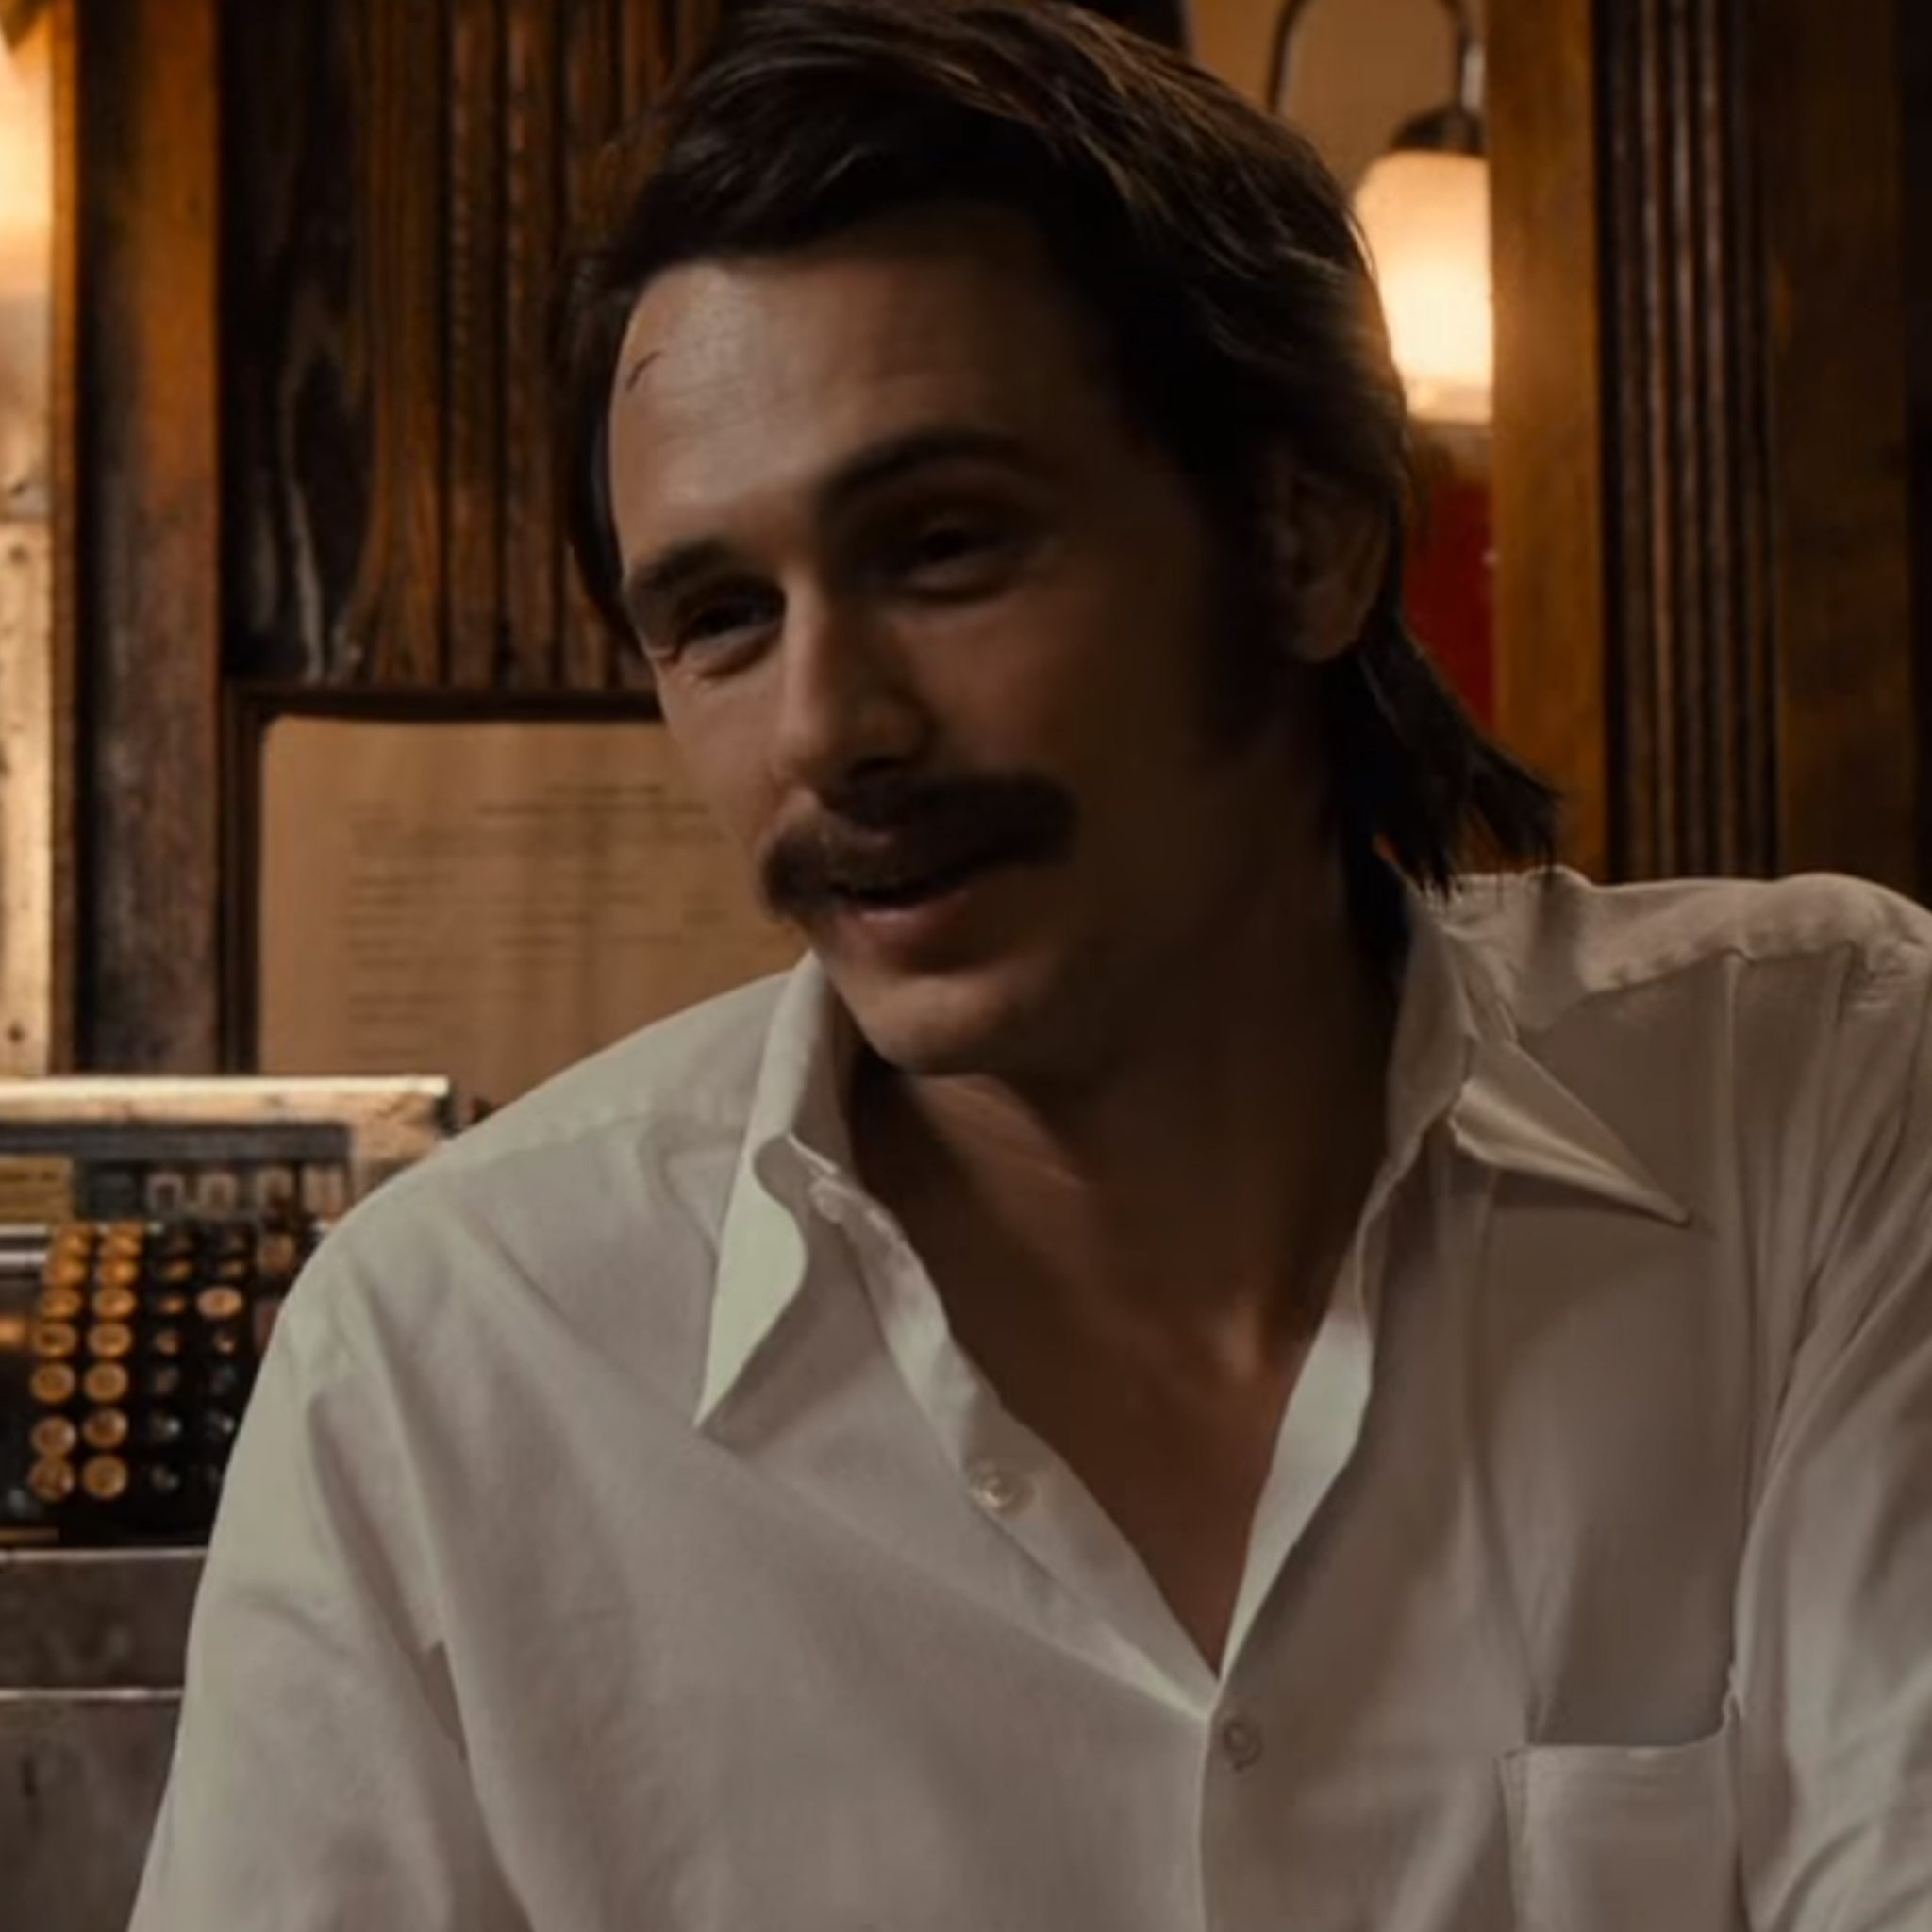 70s Porn Star James Franco - James Franco Double Teams the Porn Biz in HBO's 'The Deuce': TooFab Review